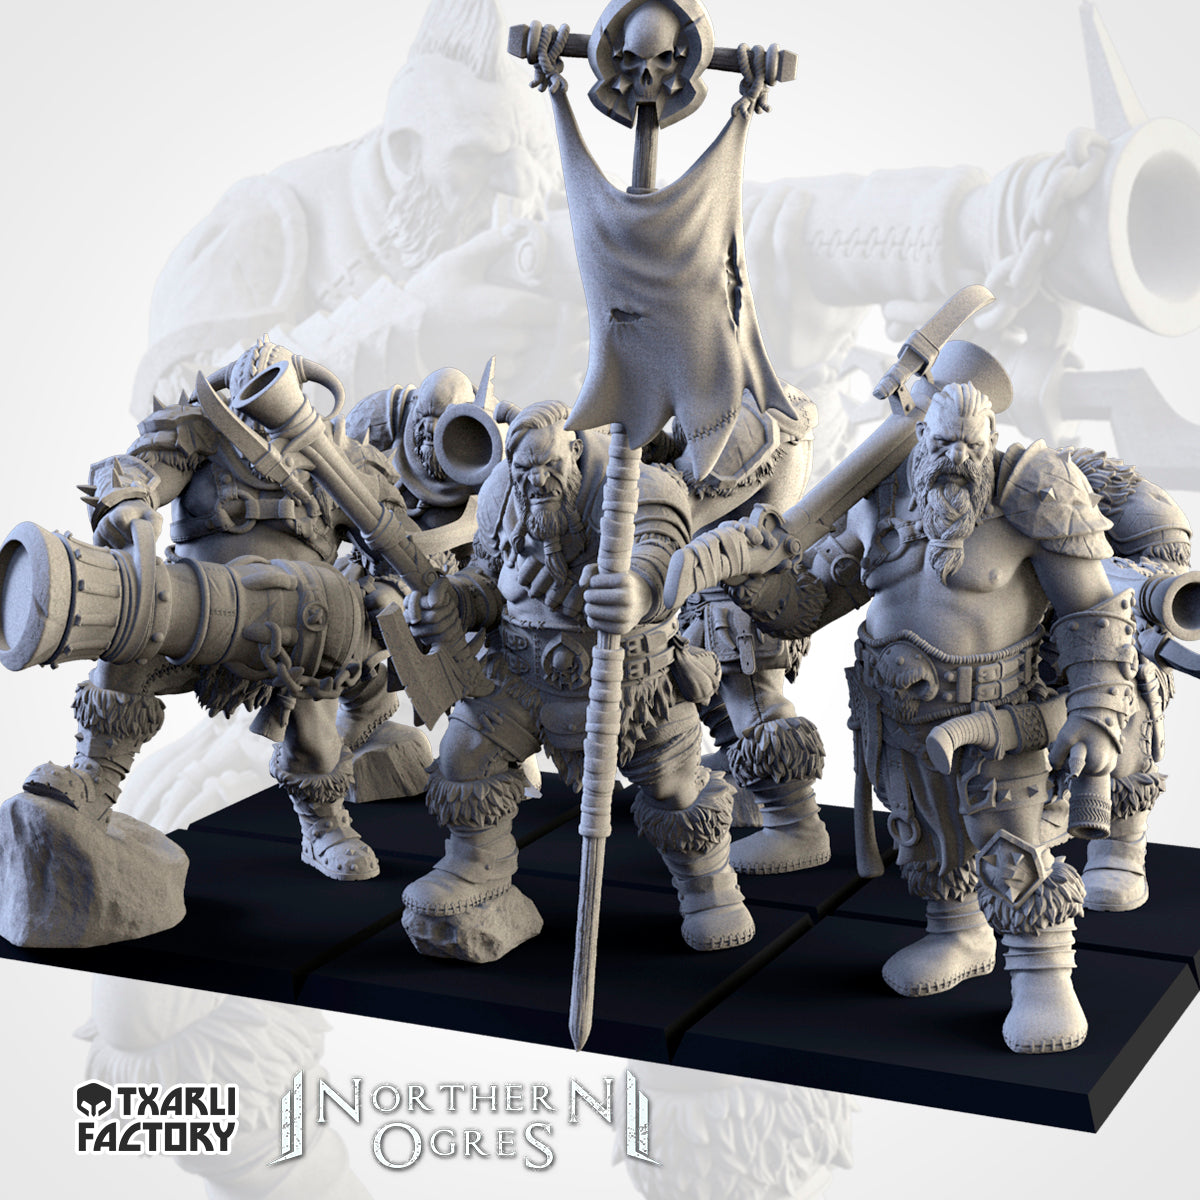 Northern Ogre Bombardiers from Txarli Factory